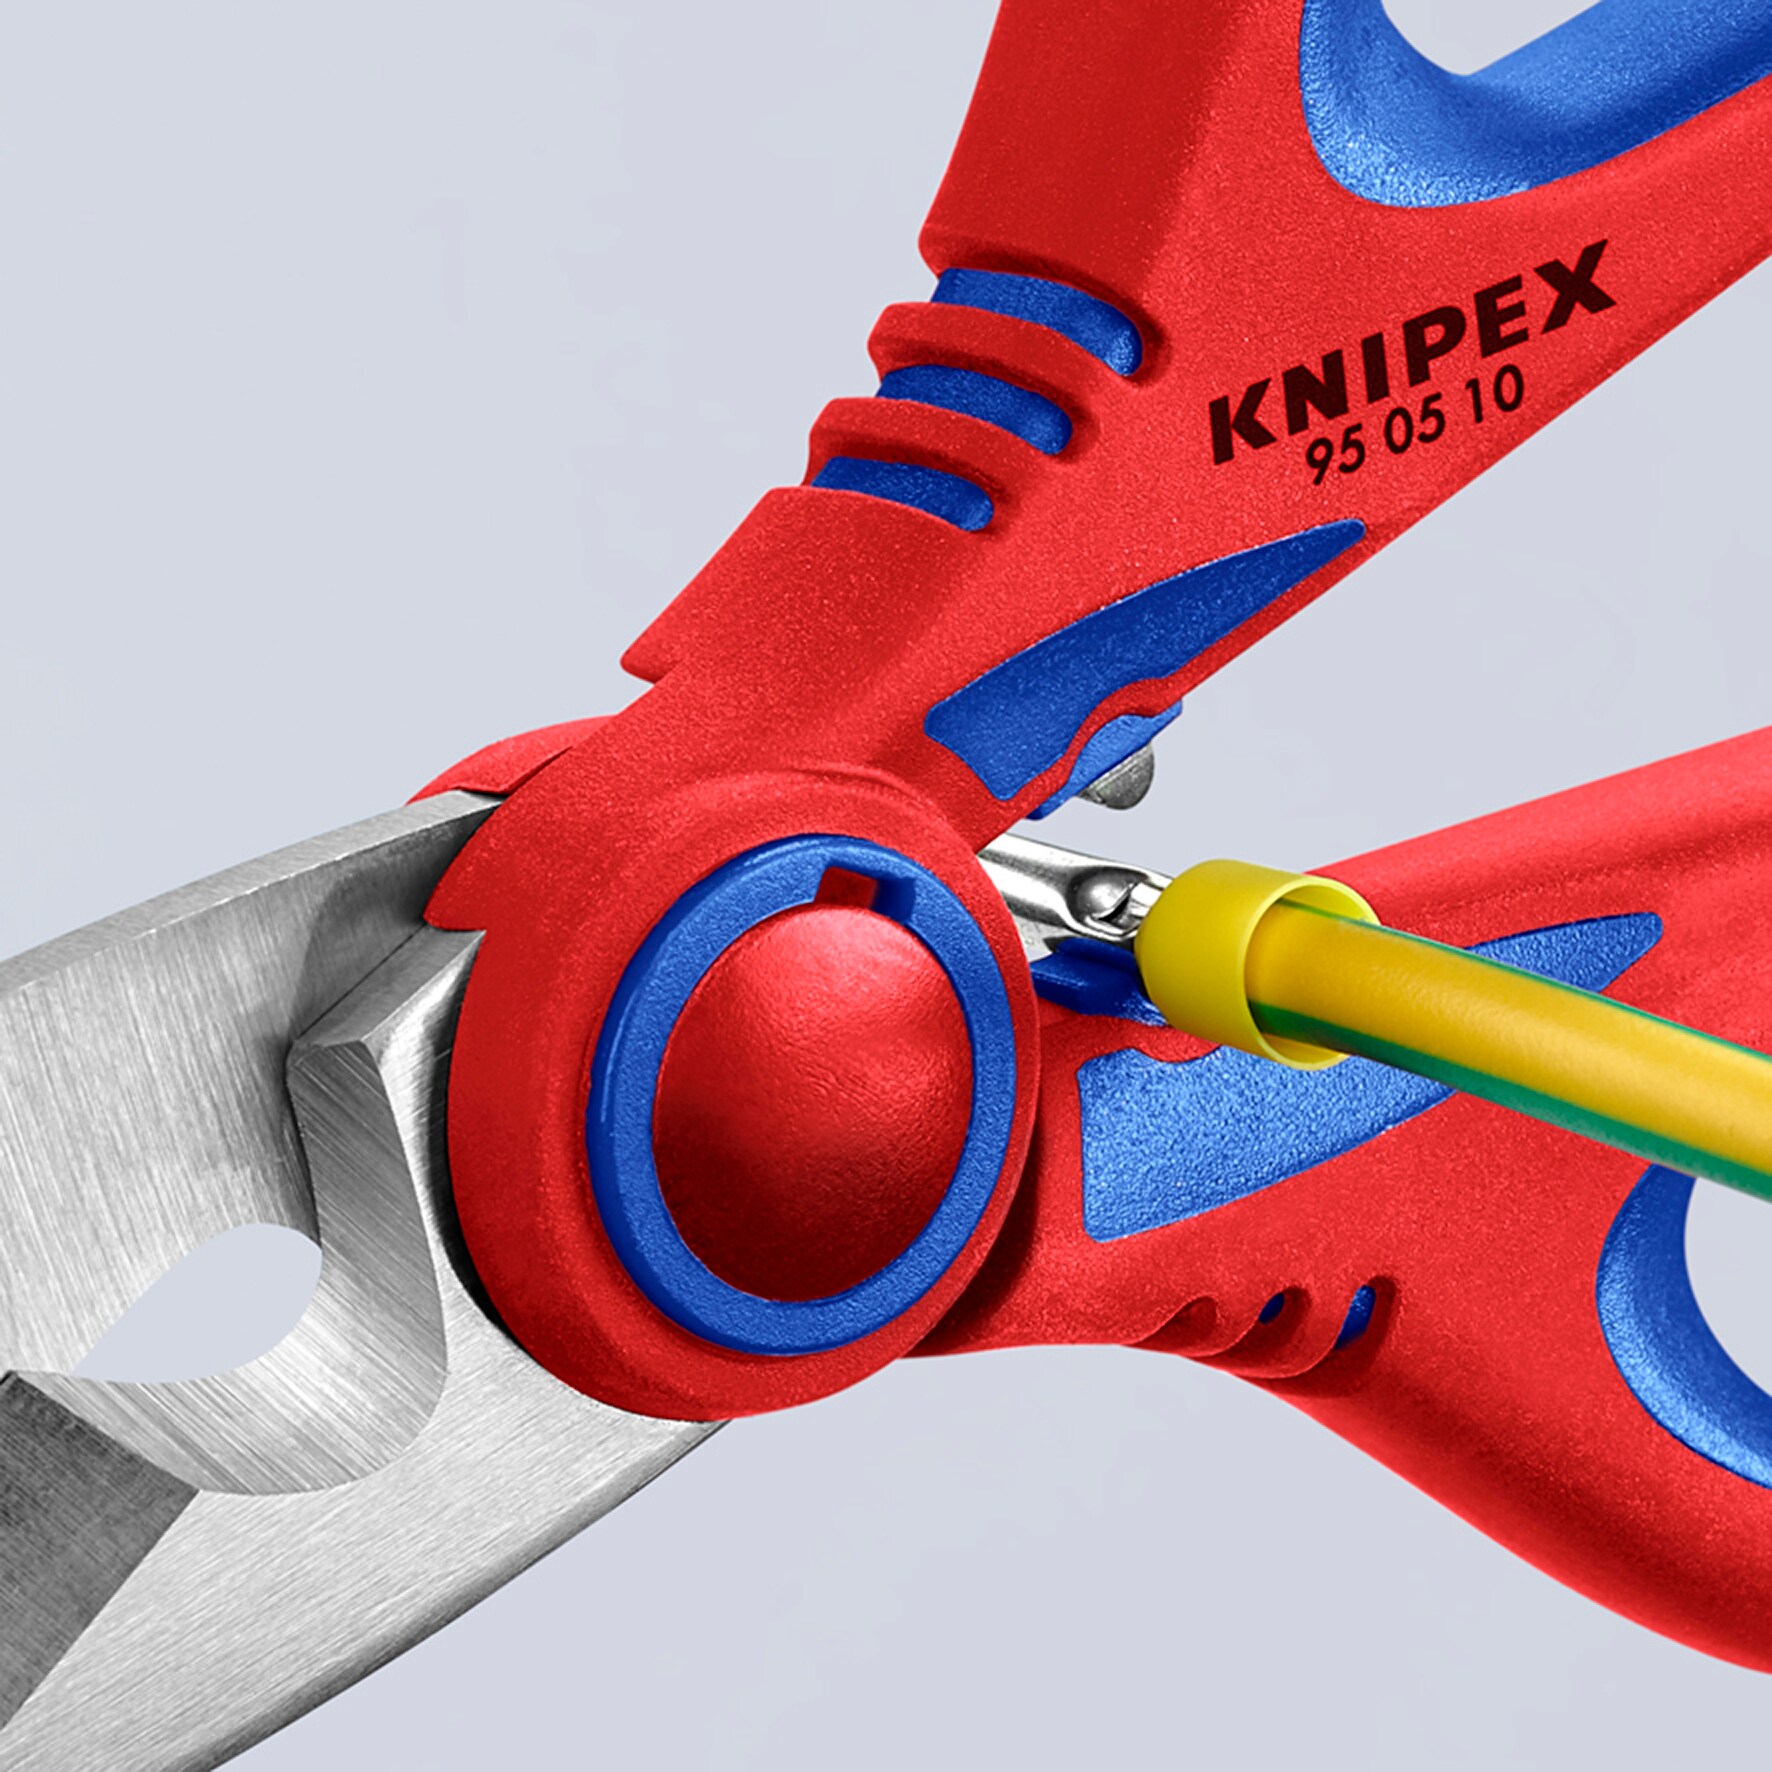 KNIPEX Electrical Cutting Pliers in Cutting Pliers department at Lowes.com